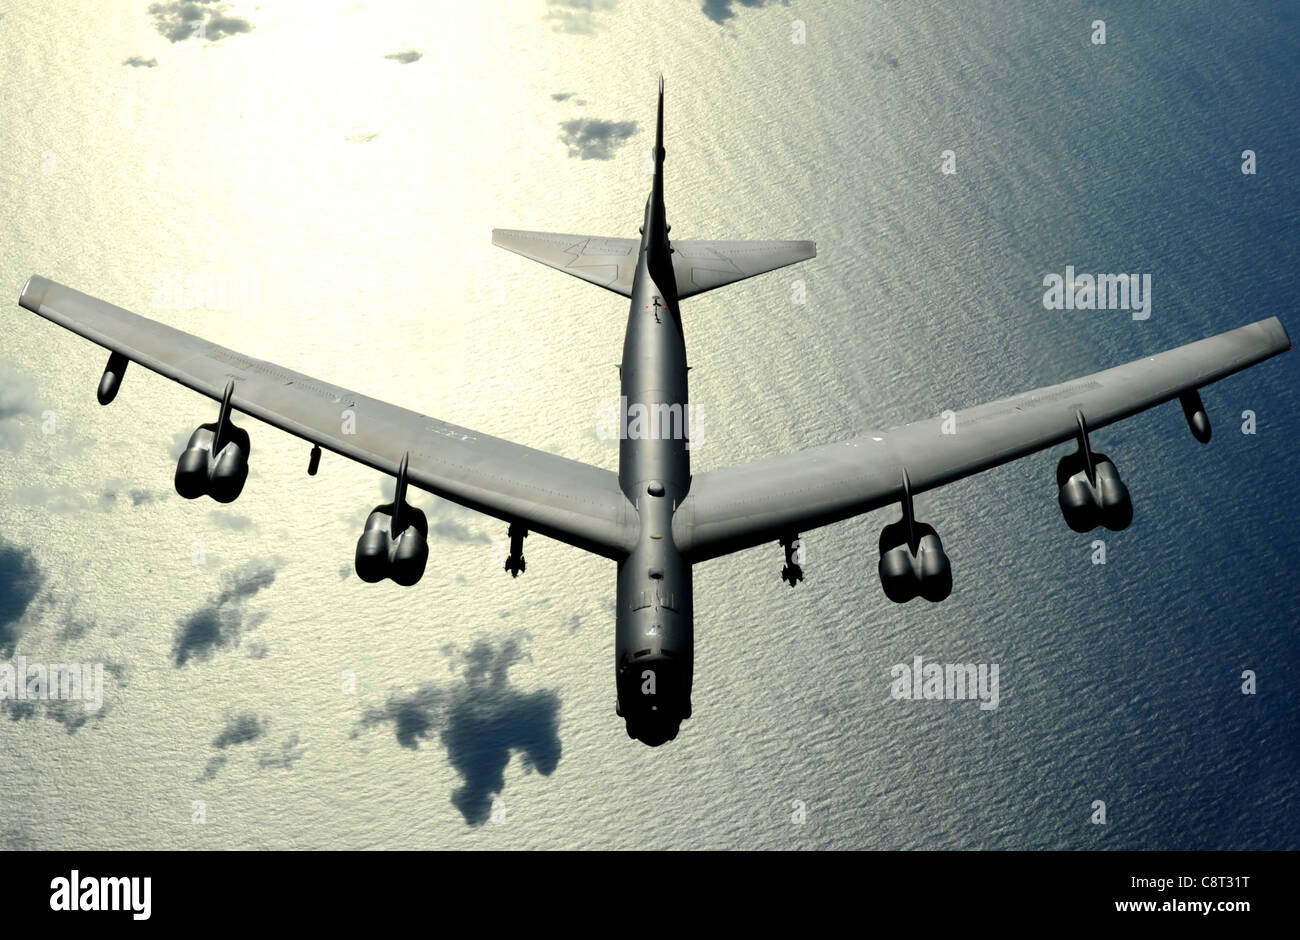 A B-52 Stratofortress from Minot Air Force Base, N.D., flies over the Pacific Ocean Stock Photo